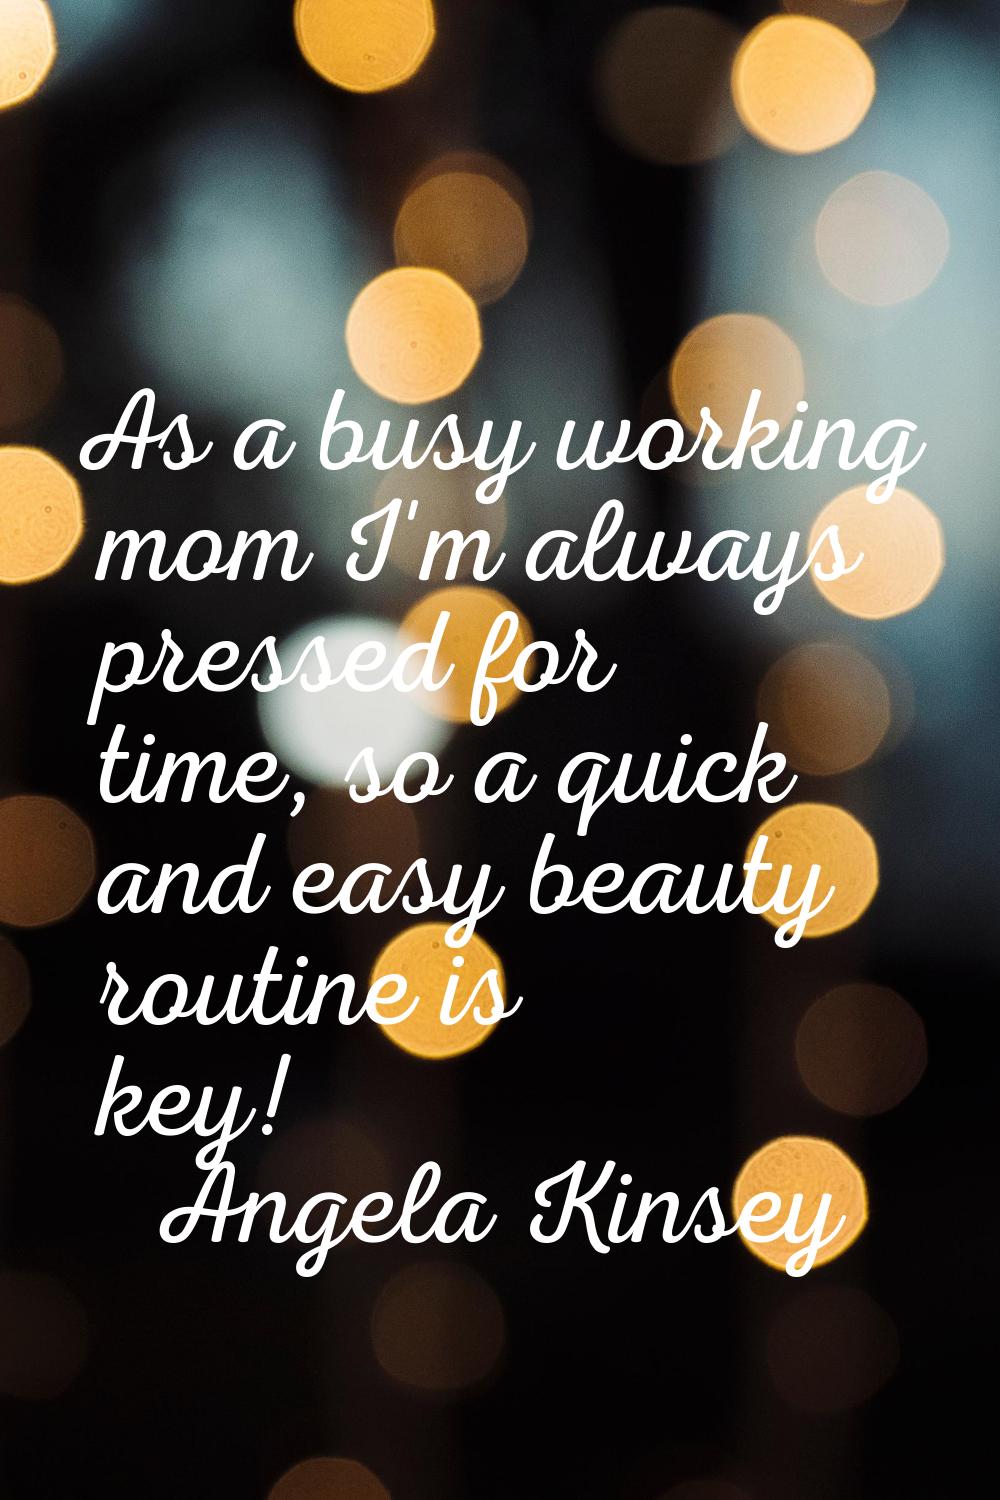 As a busy working mom I'm always pressed for time, so a quick and easy beauty routine is key!